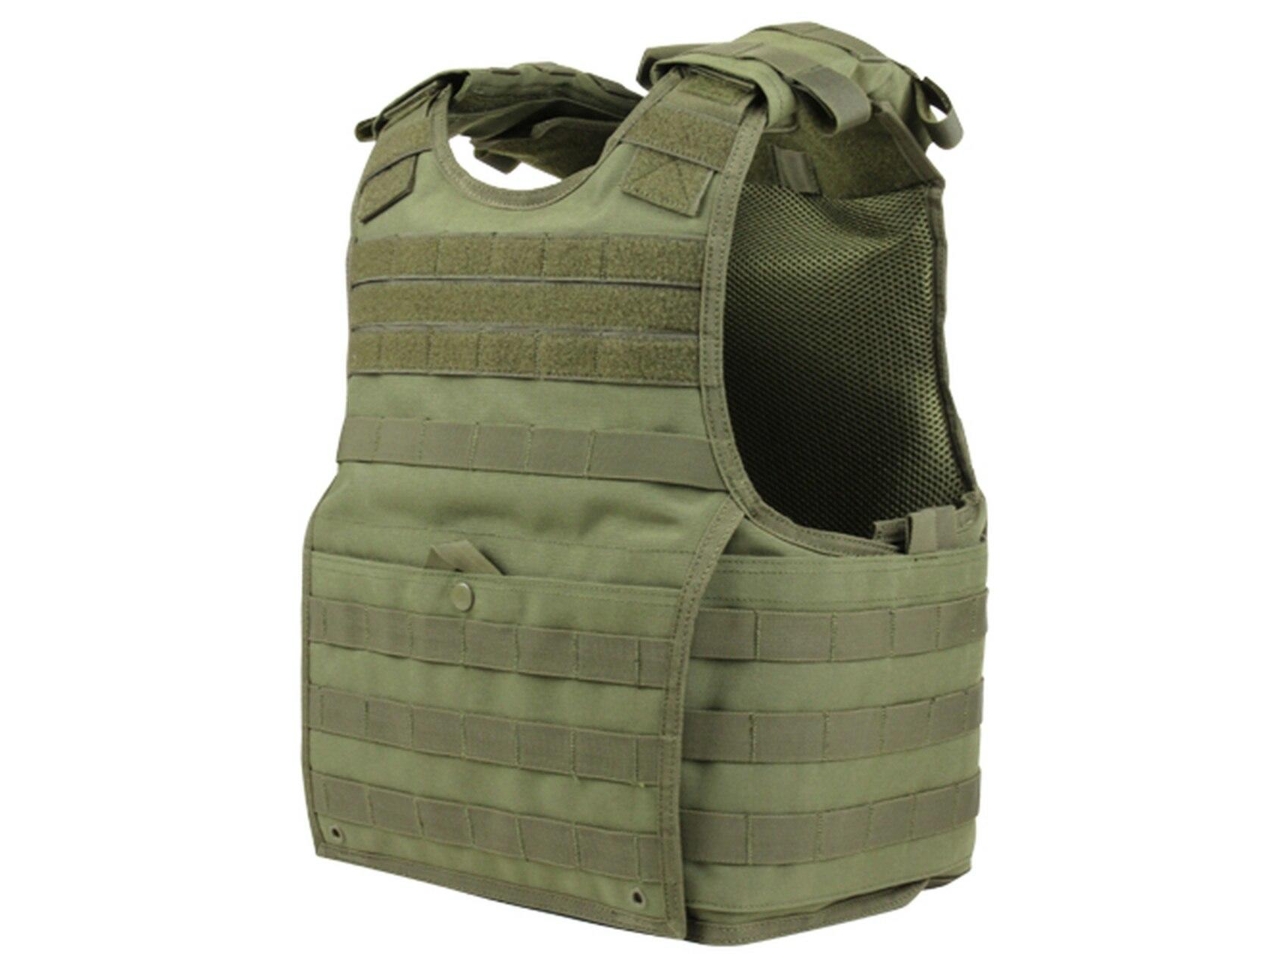 Image of Condor MOLLE Exo Plate Carrier - L/XL Olive Drab Large ID 022886265397